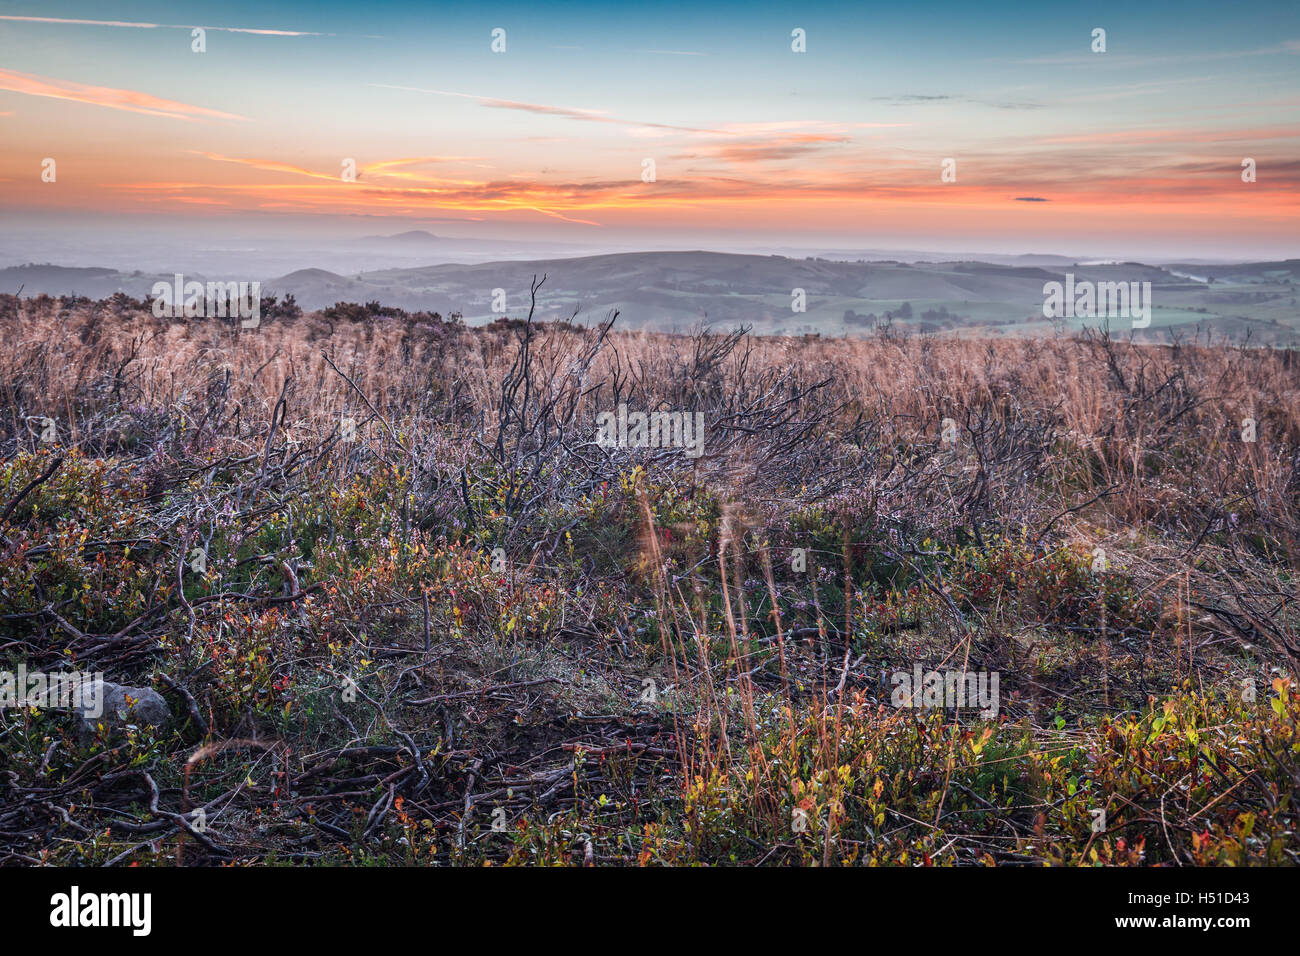 Colorful Sunrise Clouds over Autumnal Meadow with Dried Grass and Burnt Heather Branches Stock Photo